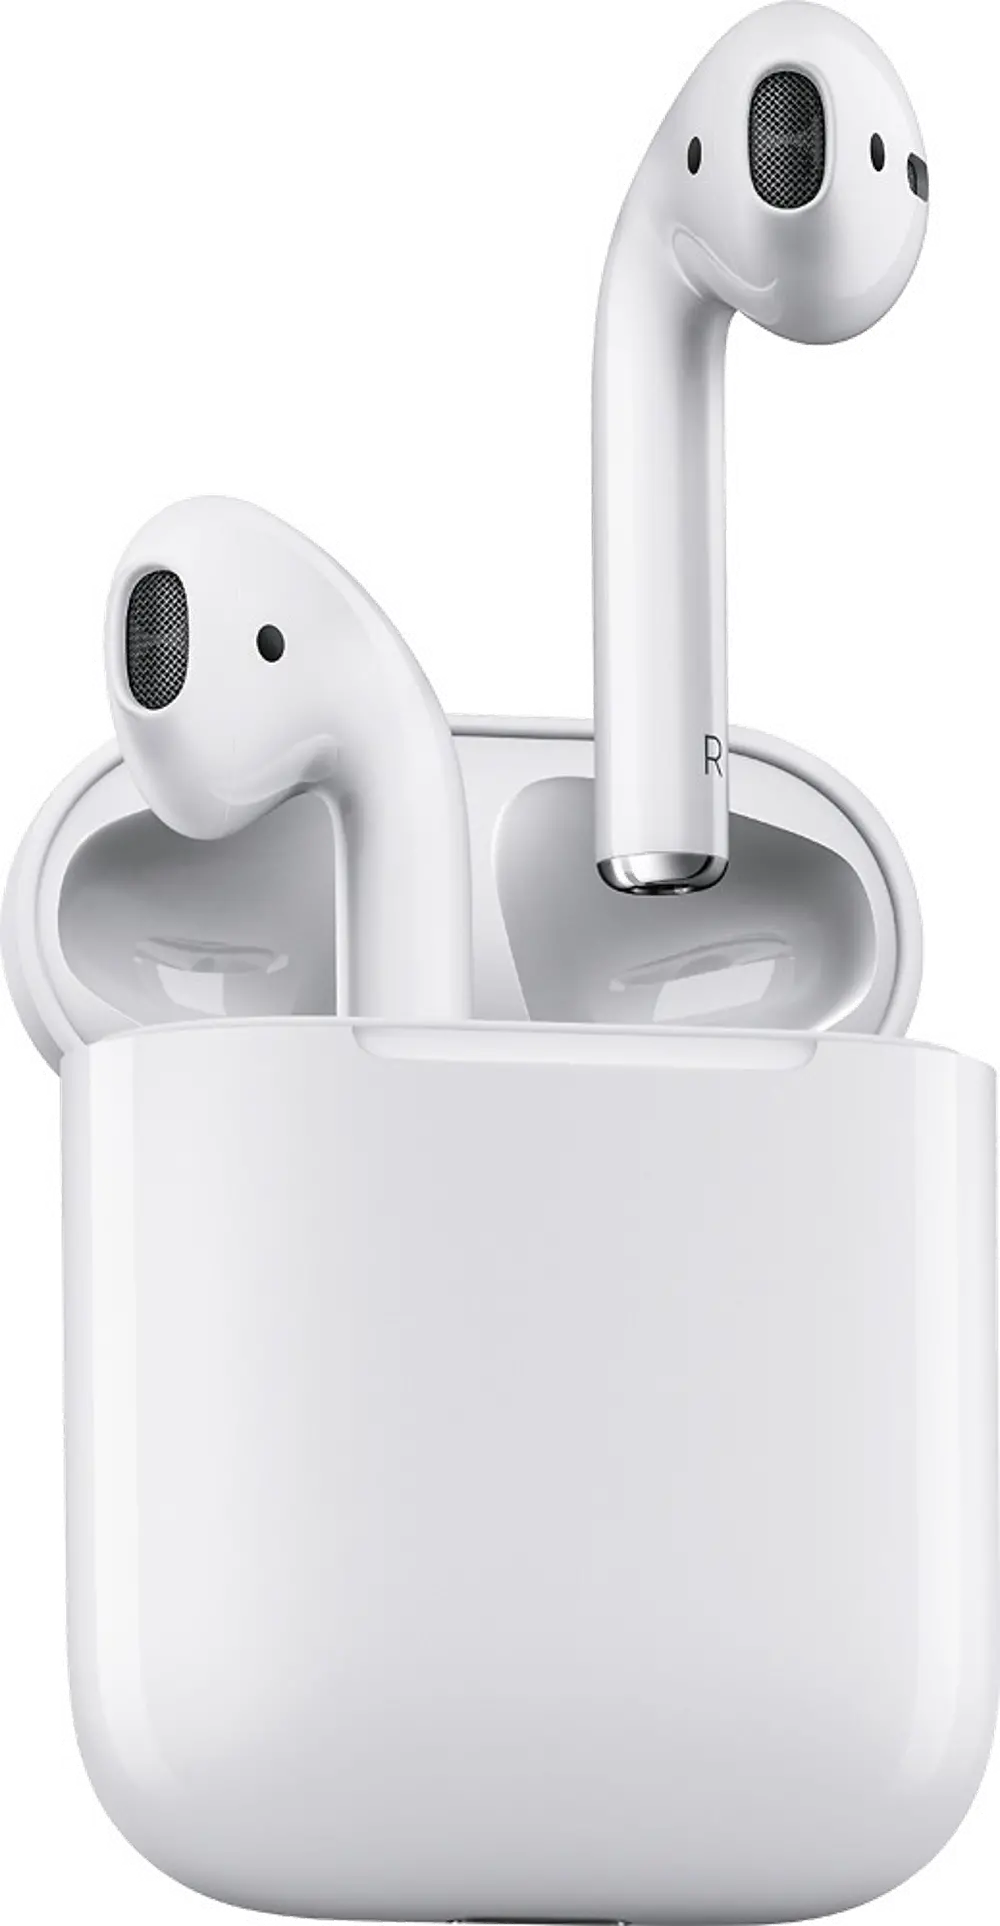 MMEF2AM/A Apple AirPods - 1st Generation-1